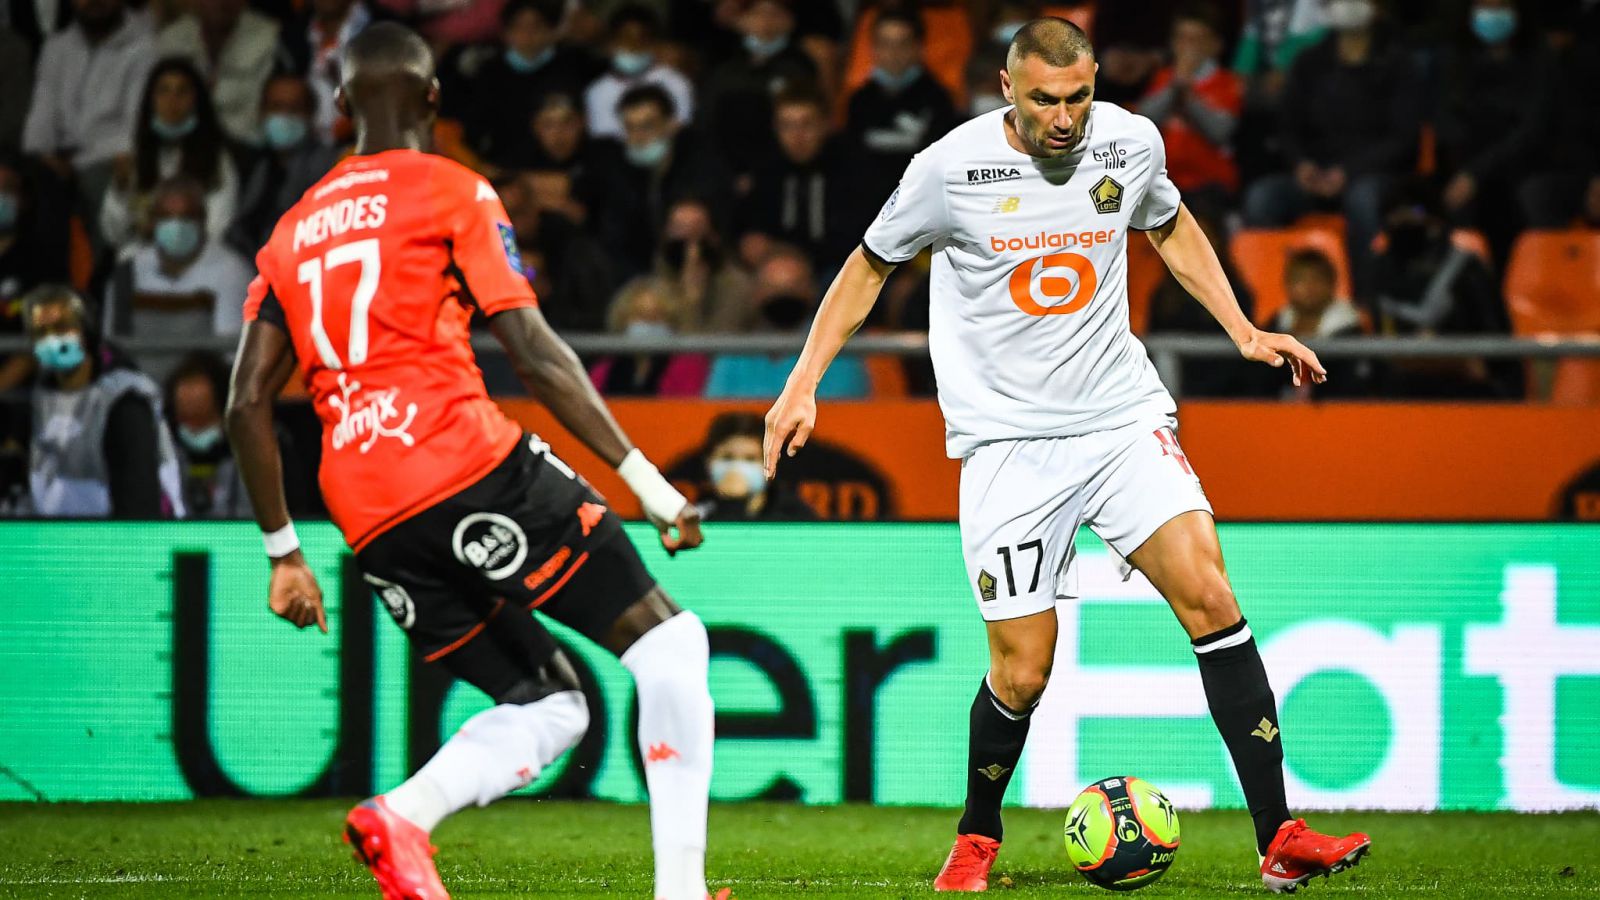 Ligue 1 Full Highlight, Watch Lorient 2-1 LOSC Lille, Video Highlights Lorient 2-1 LOSC Lille 2022.10.02, Lorient Full Goals Highlights, Lille Full Goals Highlight